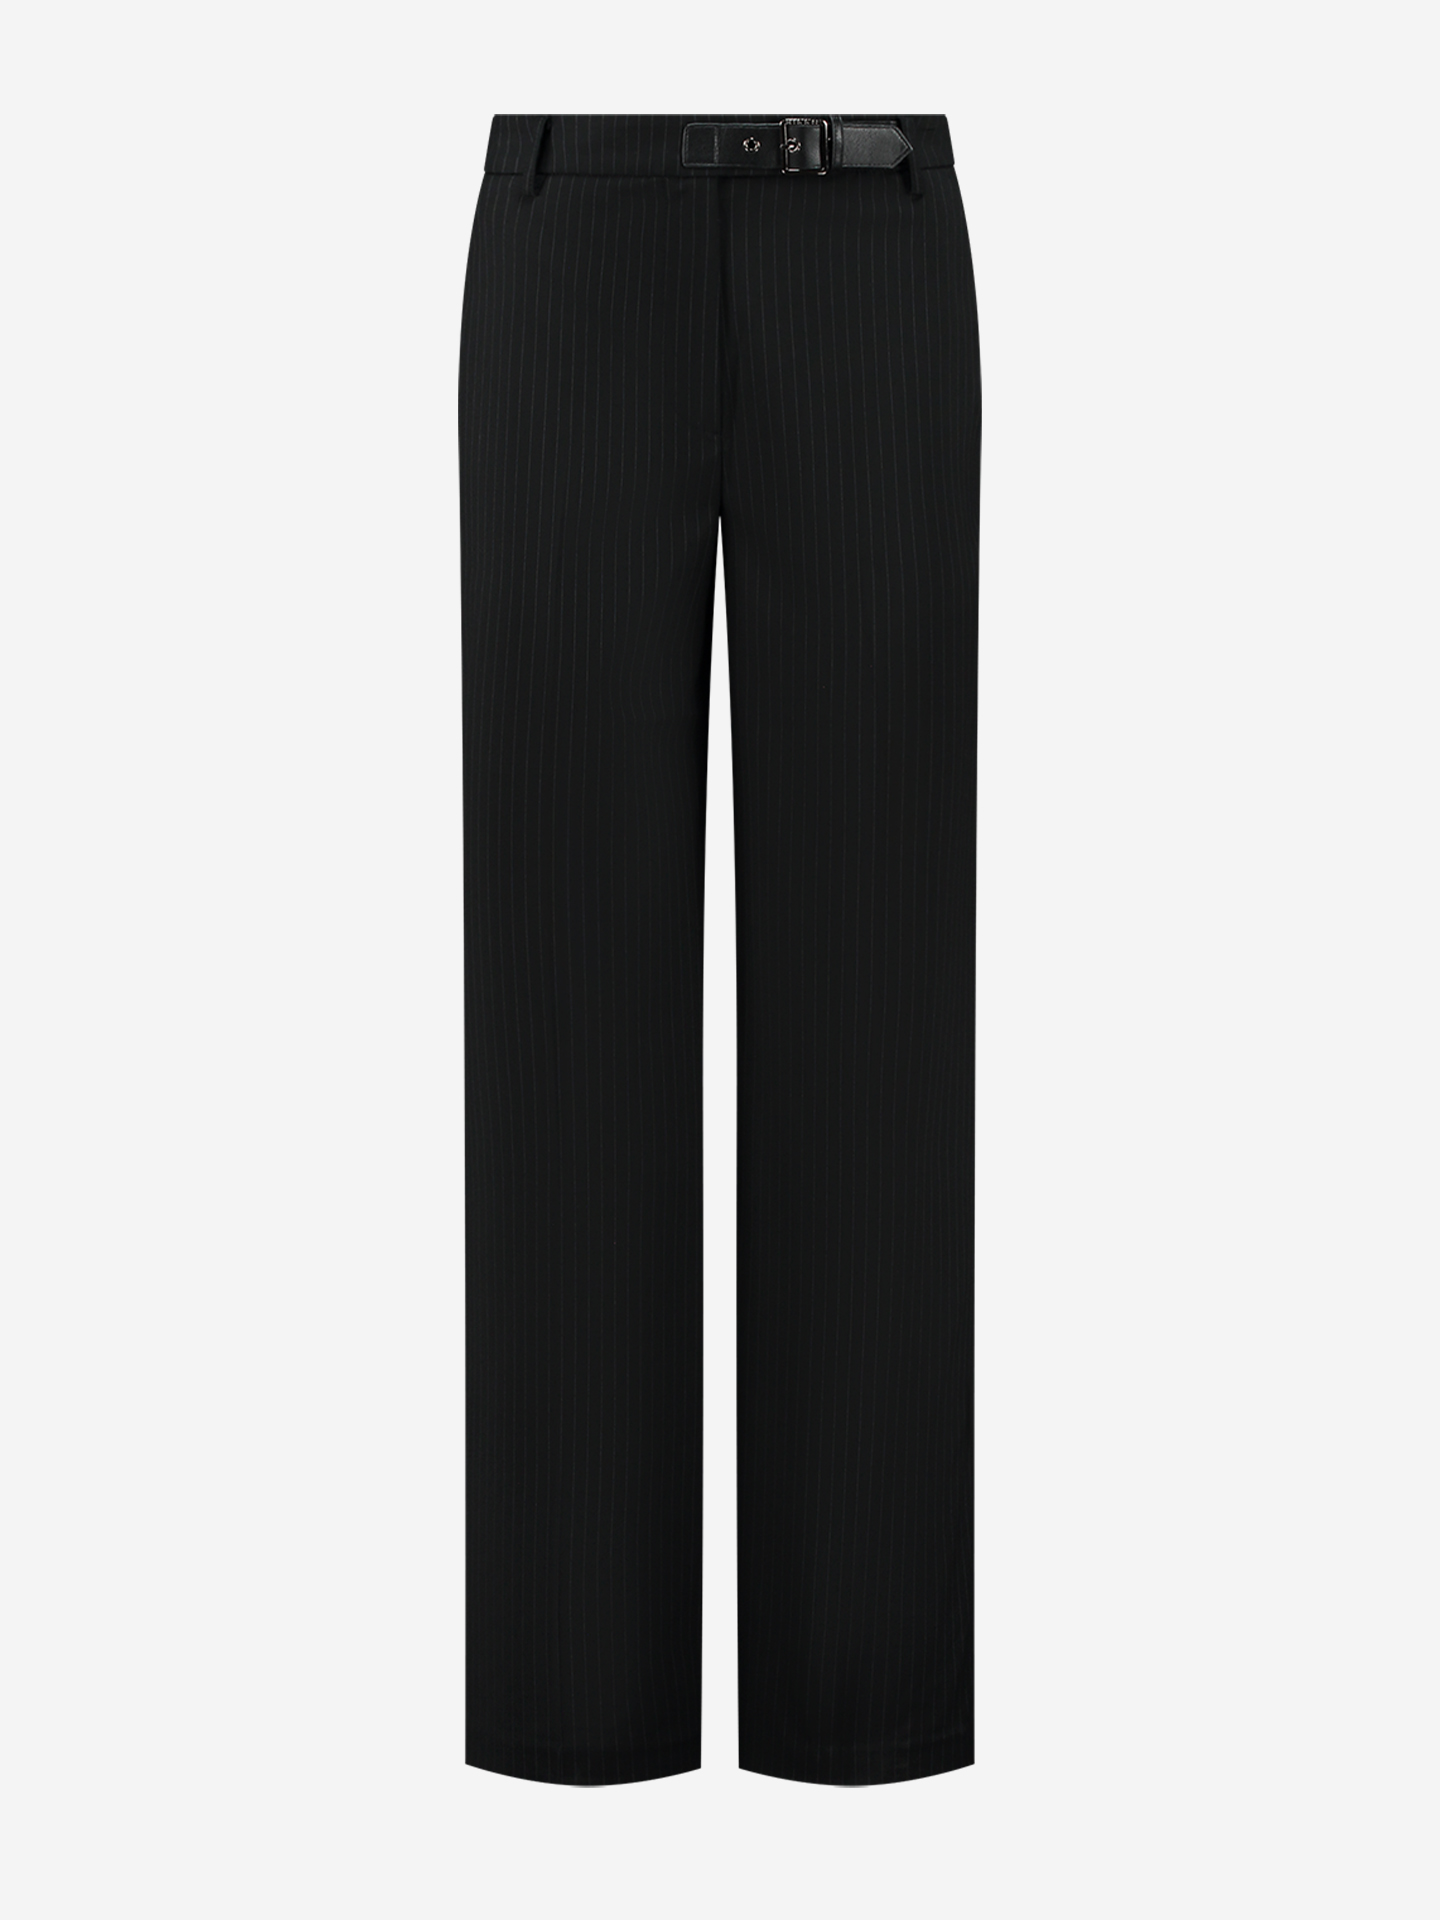 Straight striped pants with Mid rise